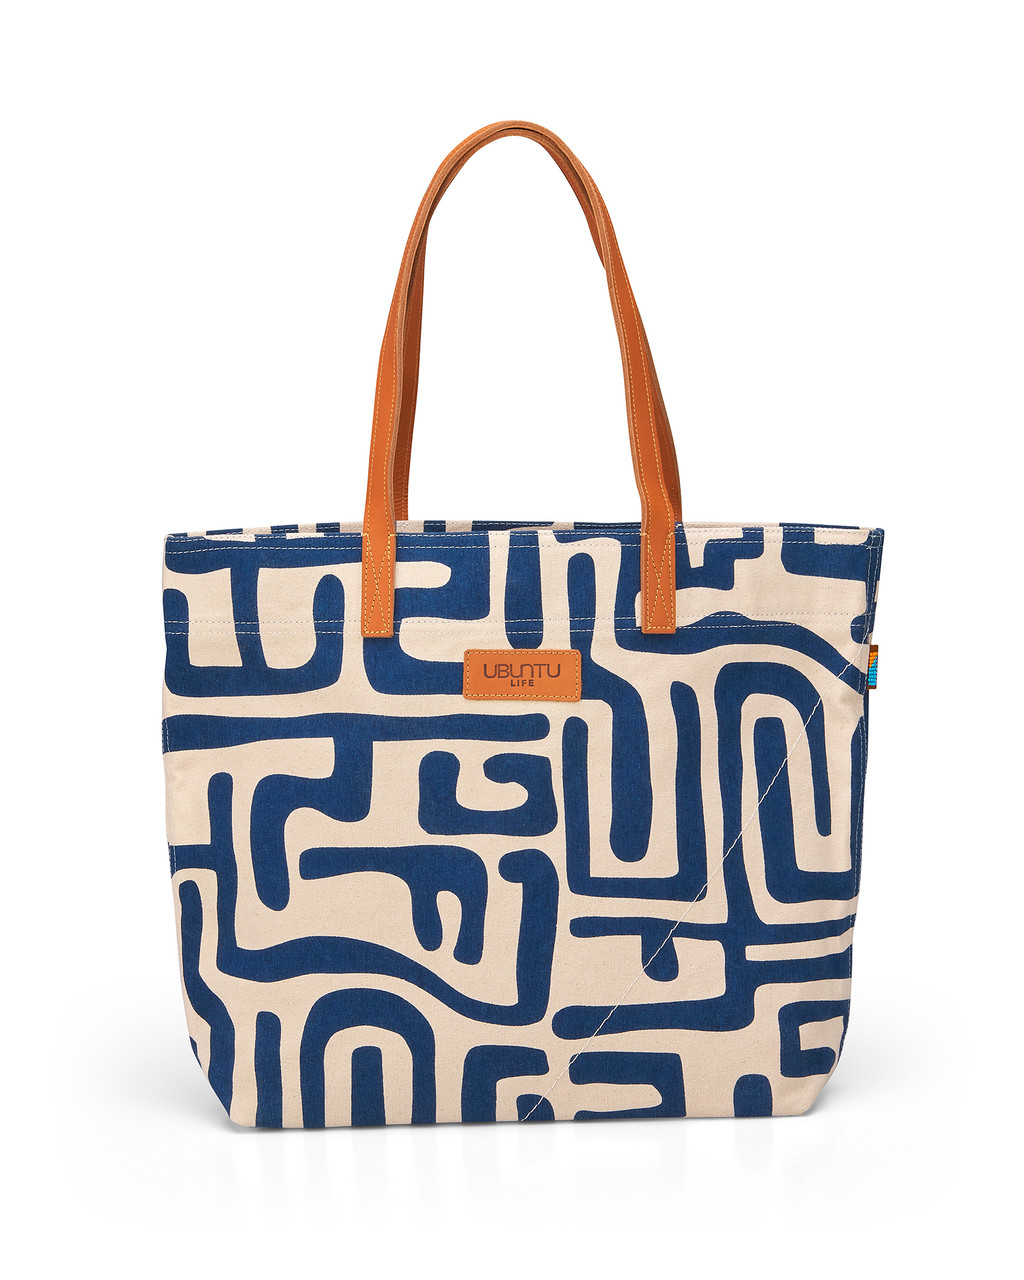 Go For It - Tote Bag